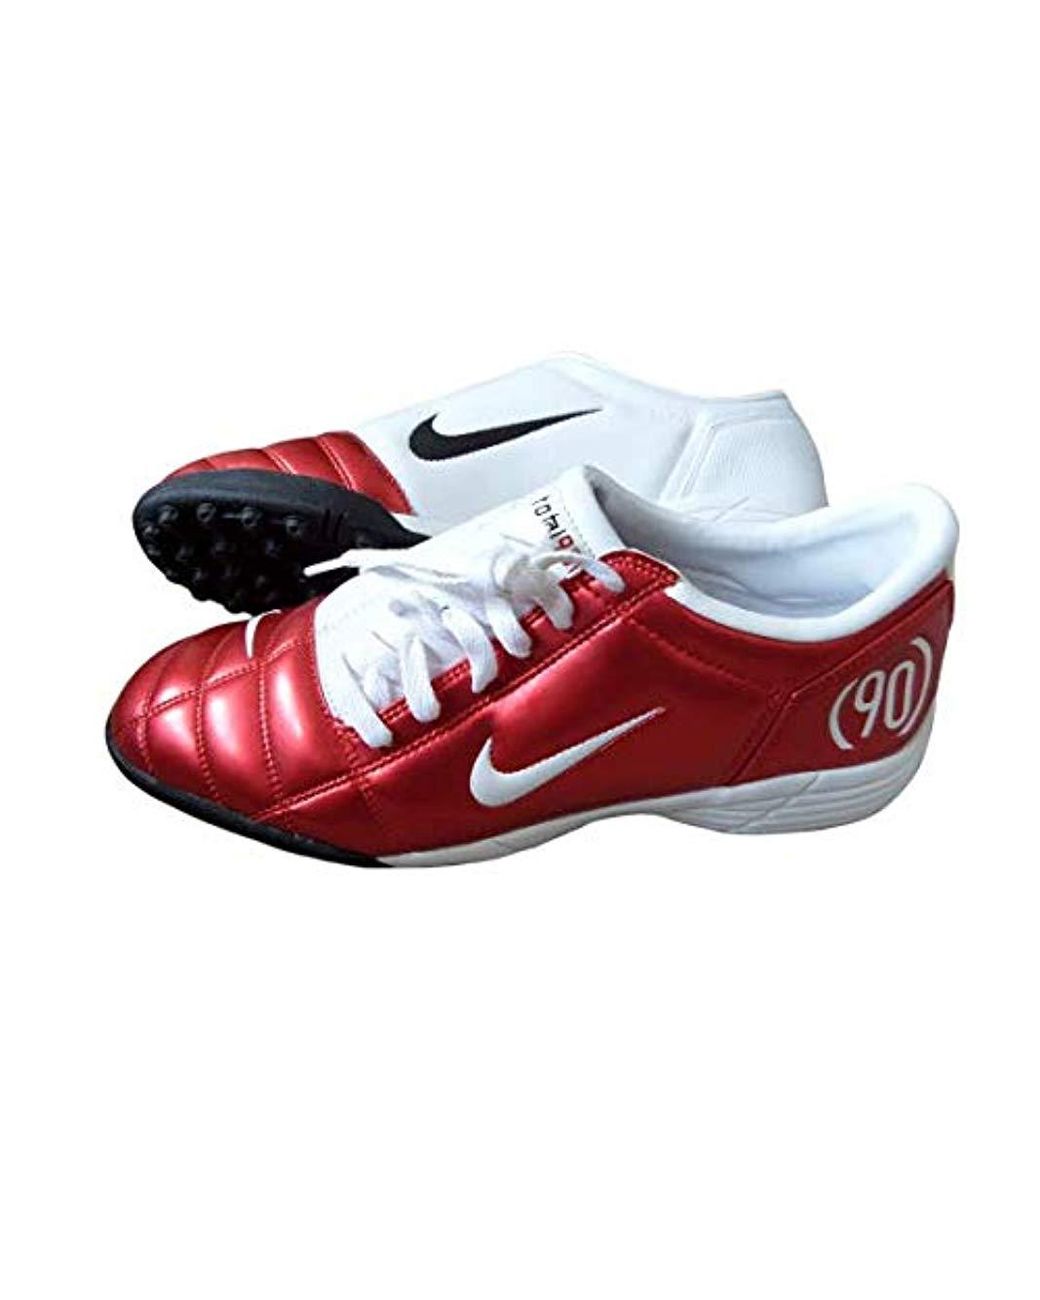 Nike Total 90 Iii Tf Plus Astro Turf Football Trainers Original 2005 Model  In Box Soccer Shoes Uk 10.5, Eur 45.5 in Red for Men | Lyst UK